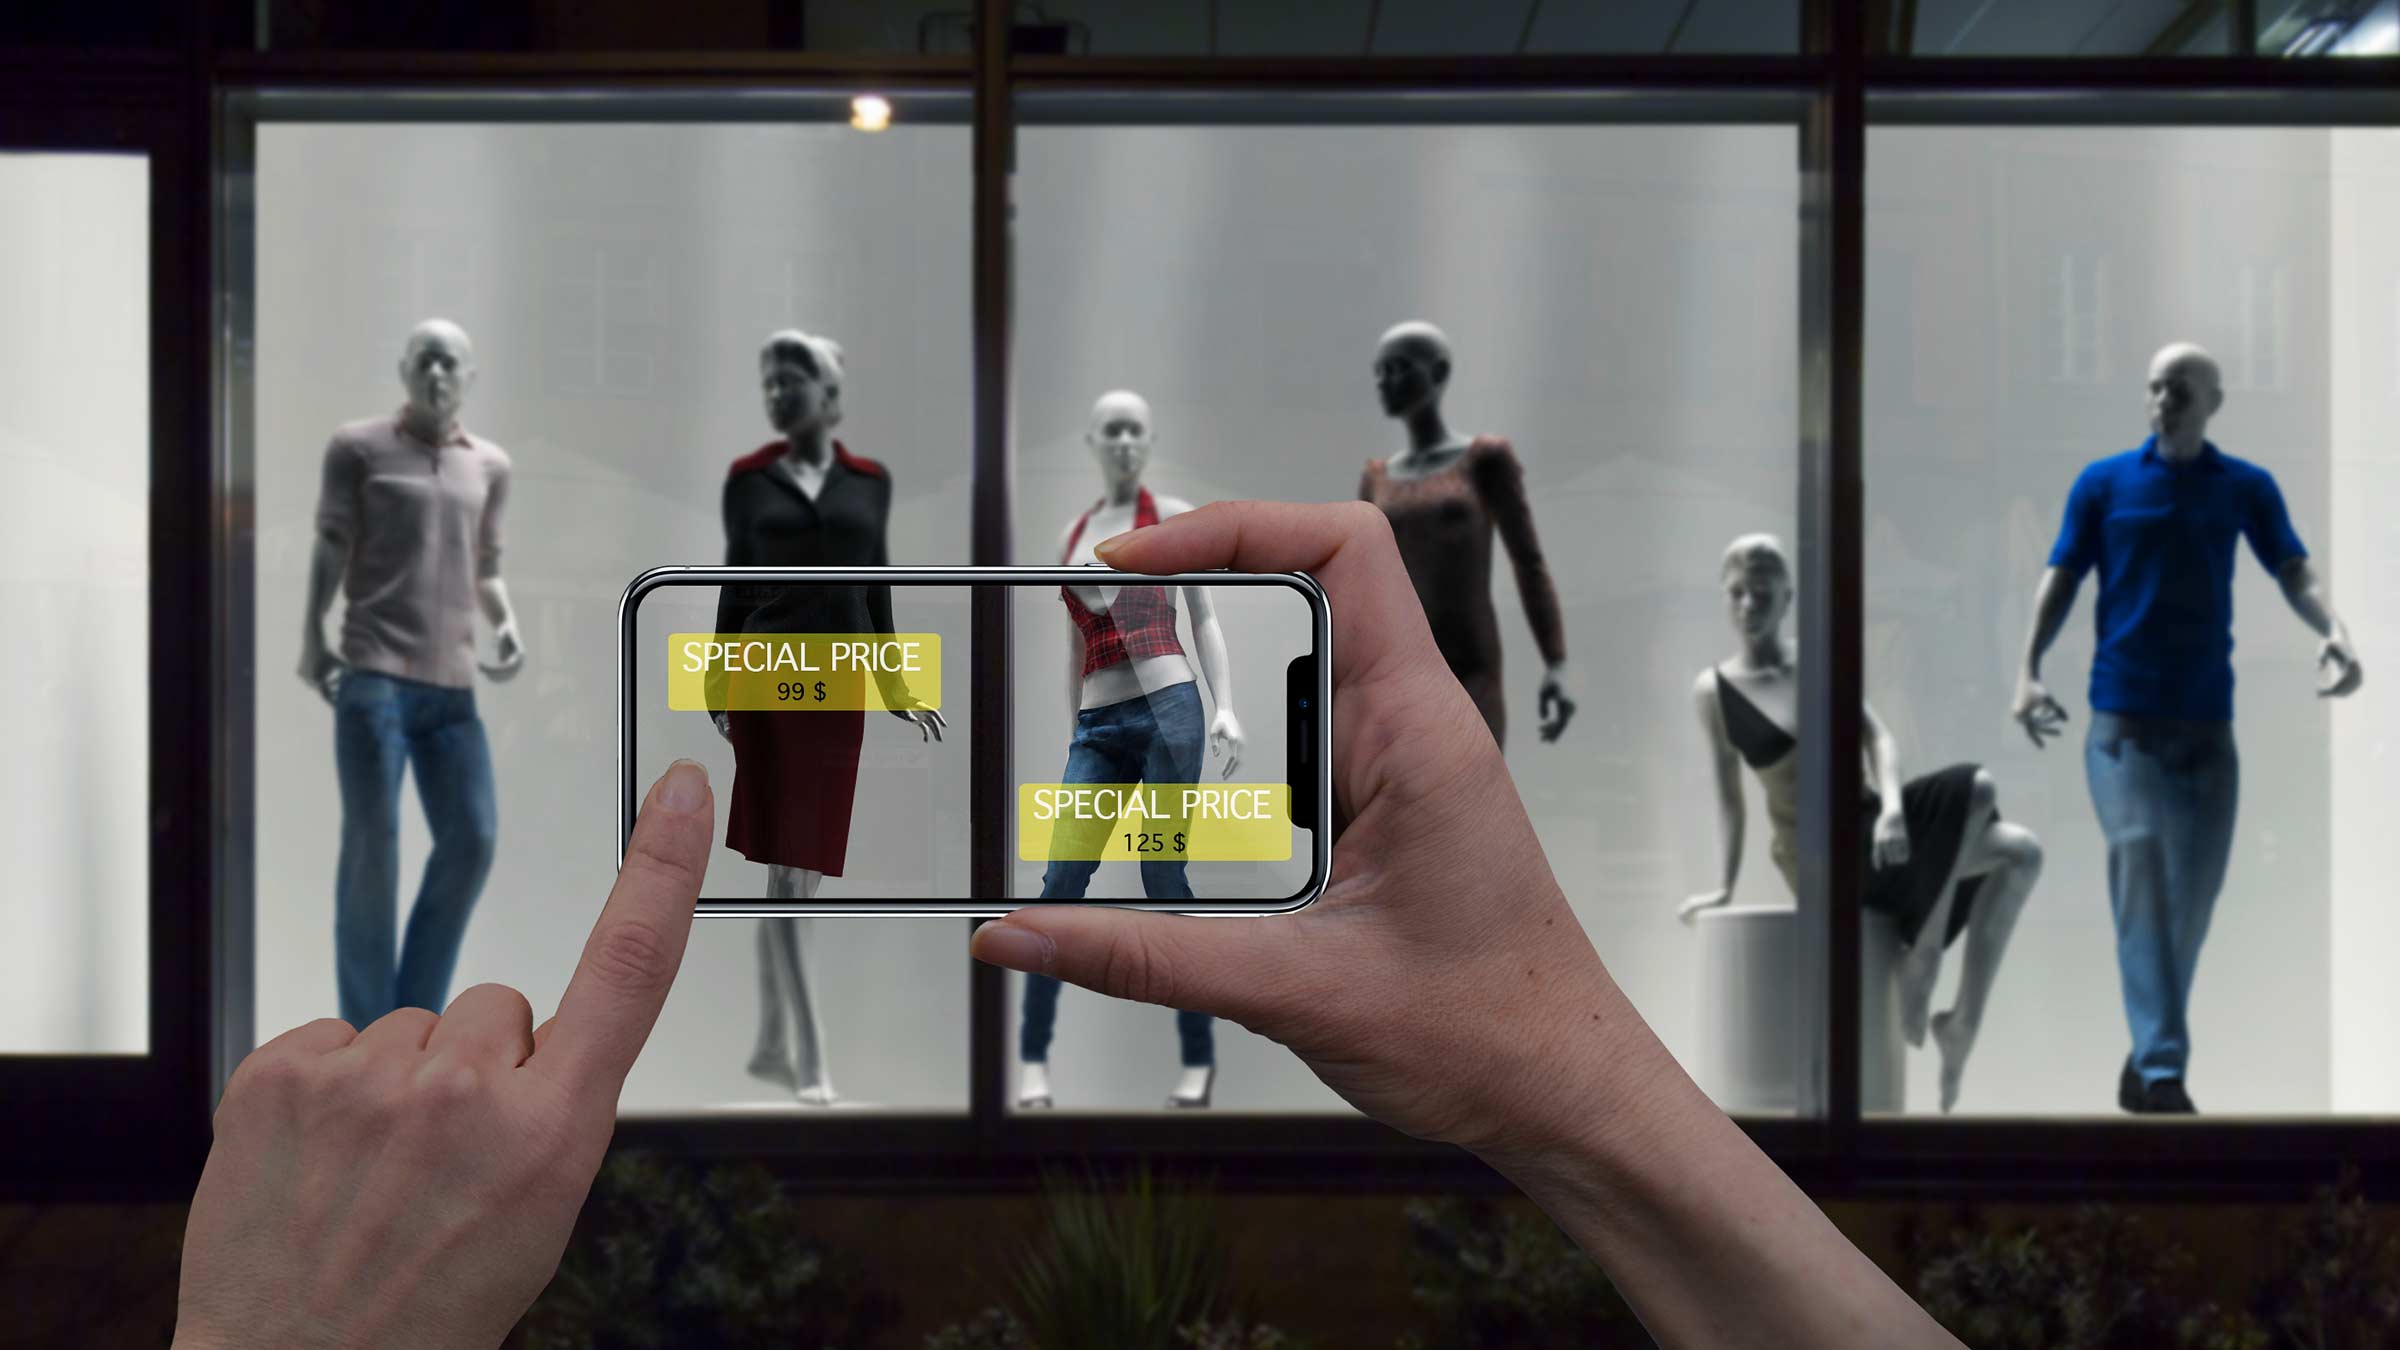 Virtual fashion, gamification and AI in the retail industry